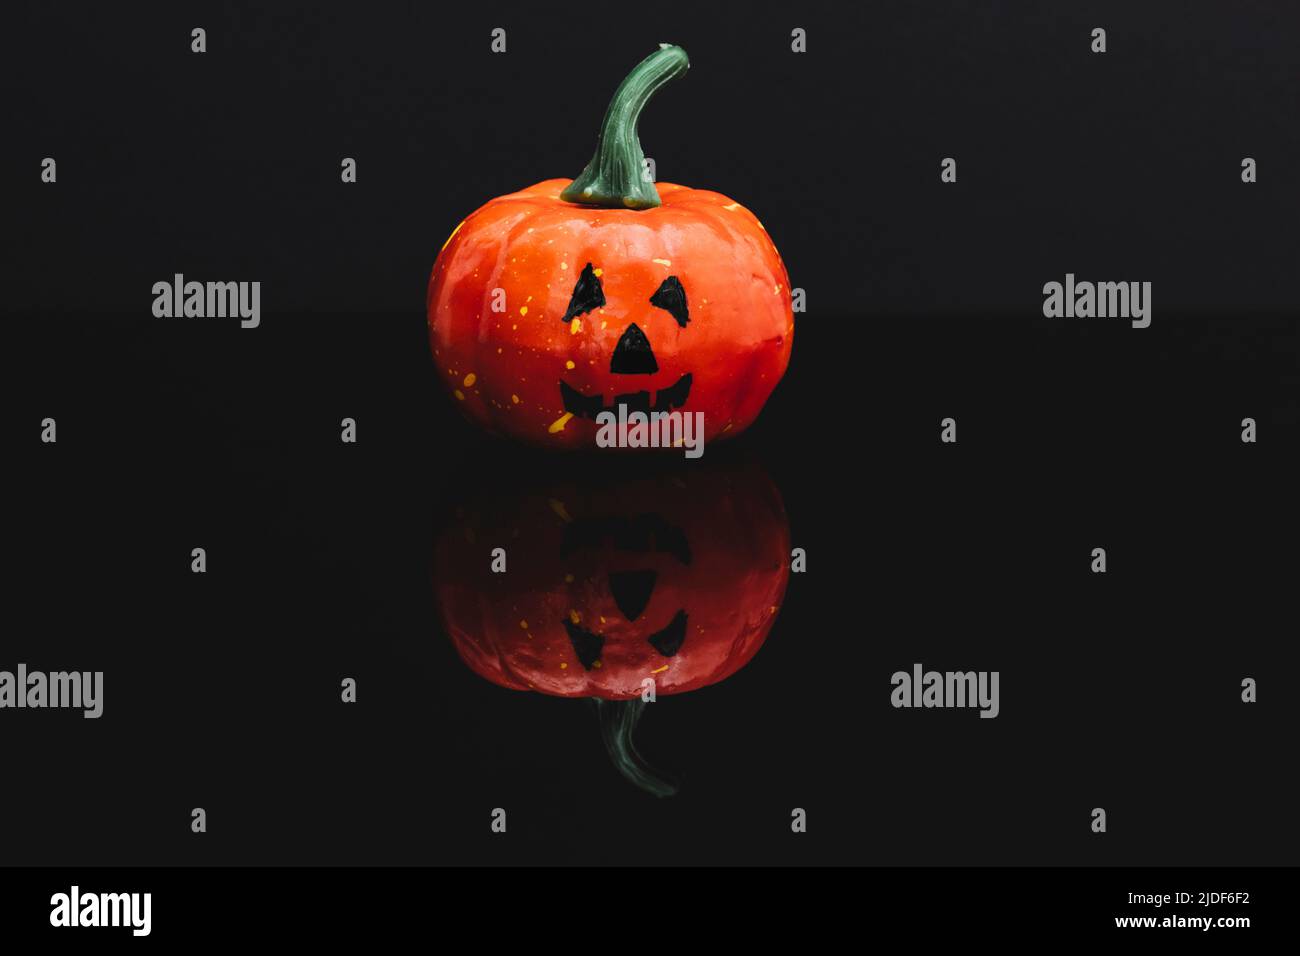 Halloween pumpkin with typical face isolated on black reflective surface. Background is dark. Stock Photo